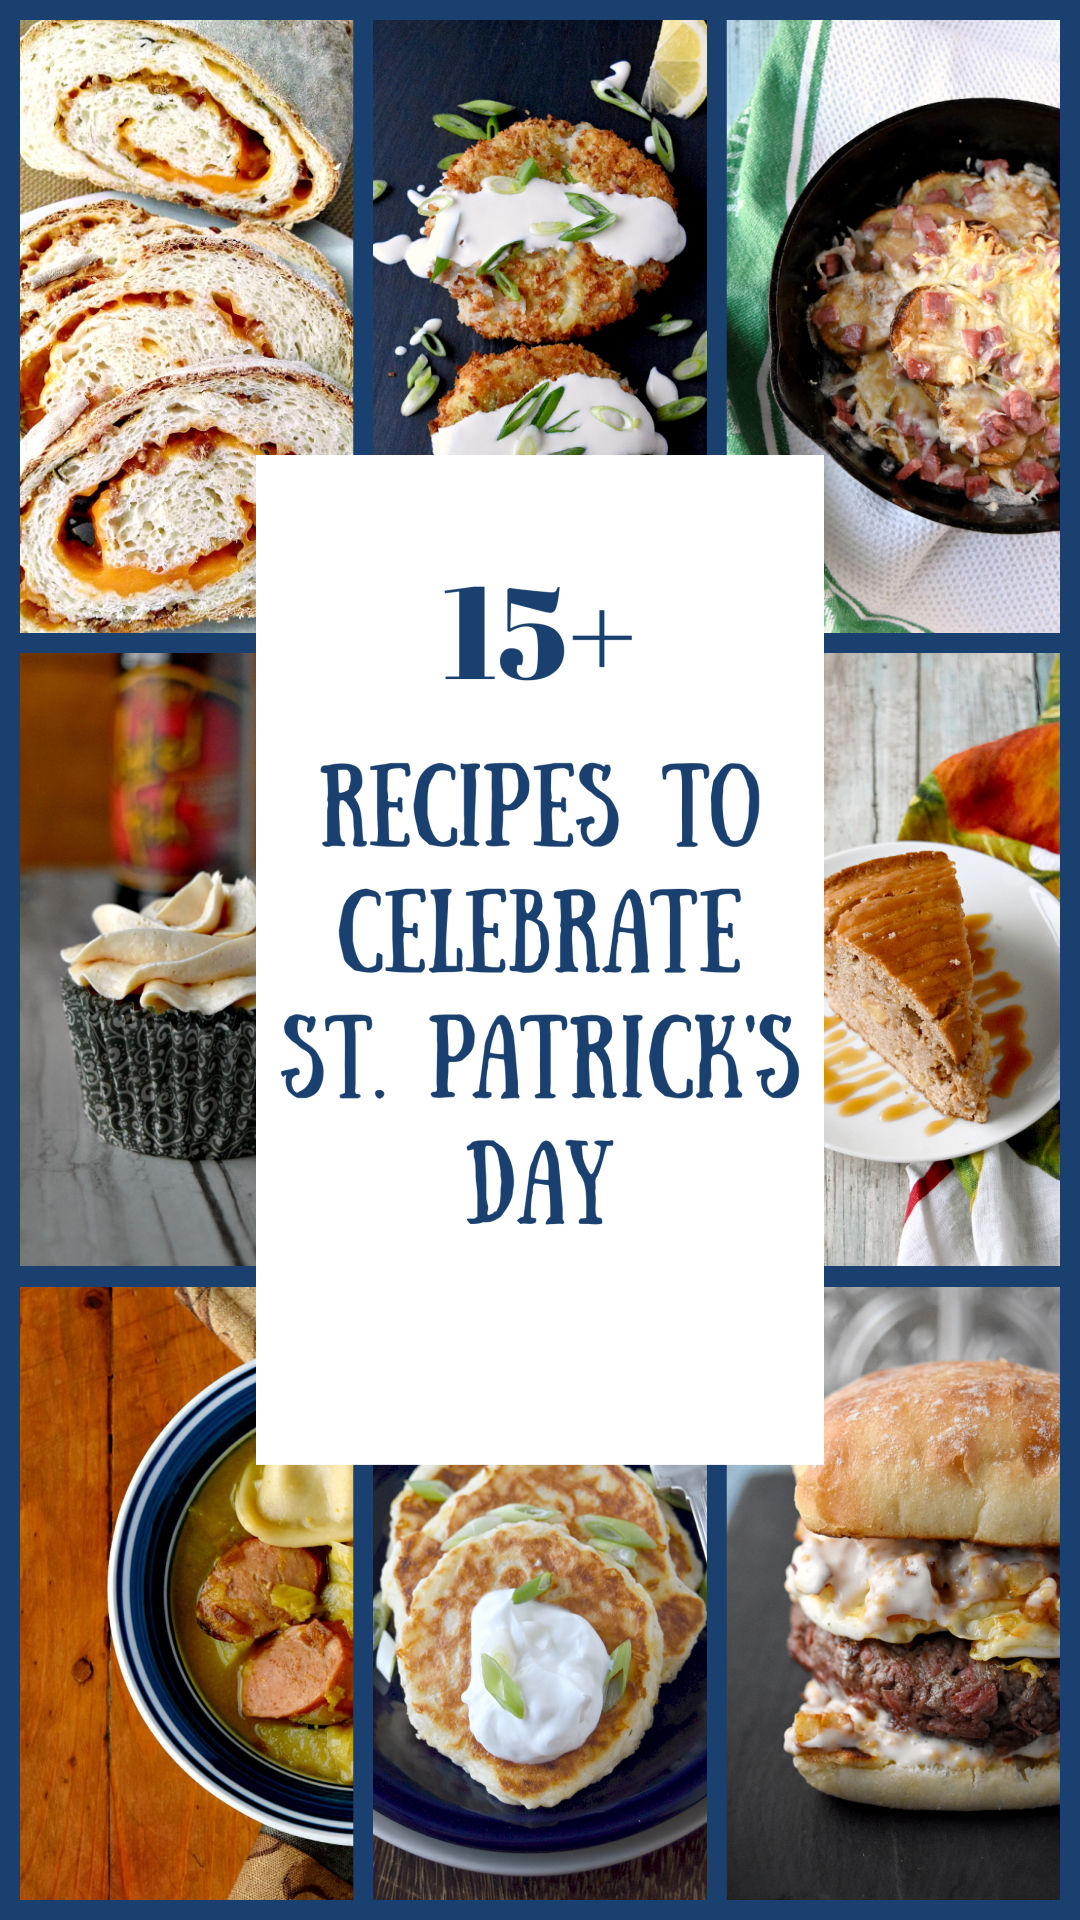 Here is 15+ Ireland Inspired St. Patrick's Day Recipes to celebrate St. Parick's Day this year.  From traditional style recipes to family favorites and mash up recipes, there's something for everyone to enjoy. #StPatricksDay #Irishrecipes #LuckoftheIrish